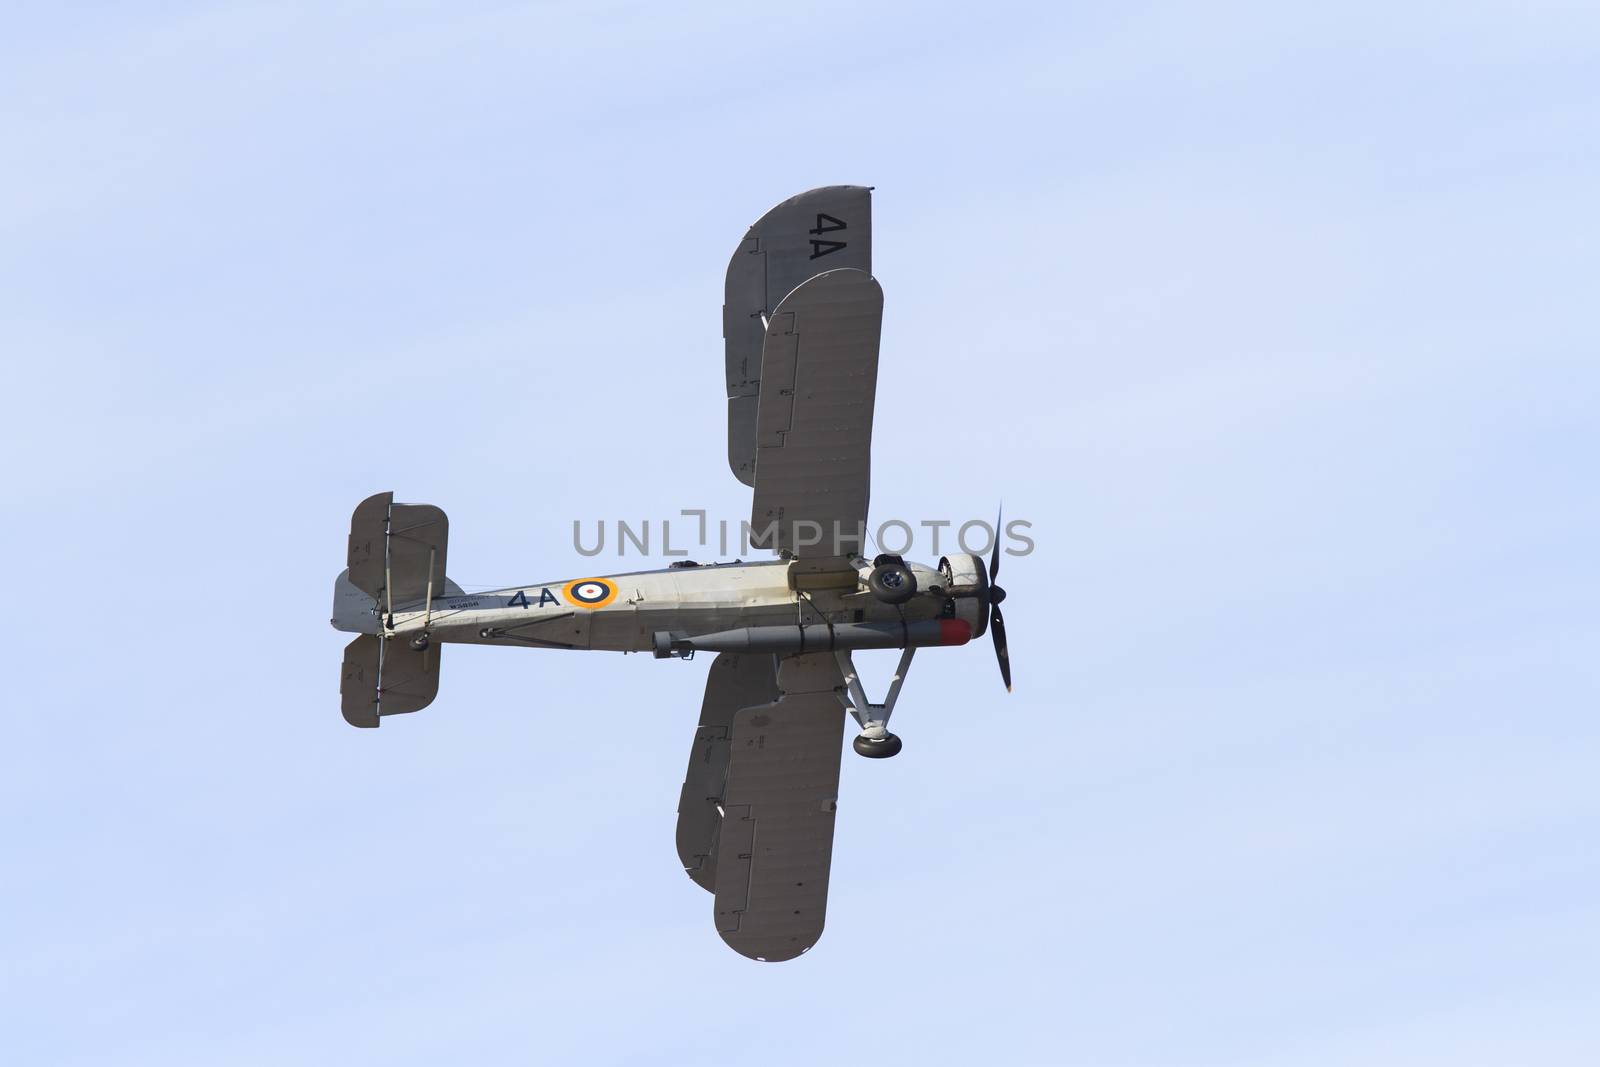 ENGLAND, Southport: A Fairey Swordfish bi-plane flies during the Southport Airshow 2015 in Southport, Merseyside in England on September 19, 2015